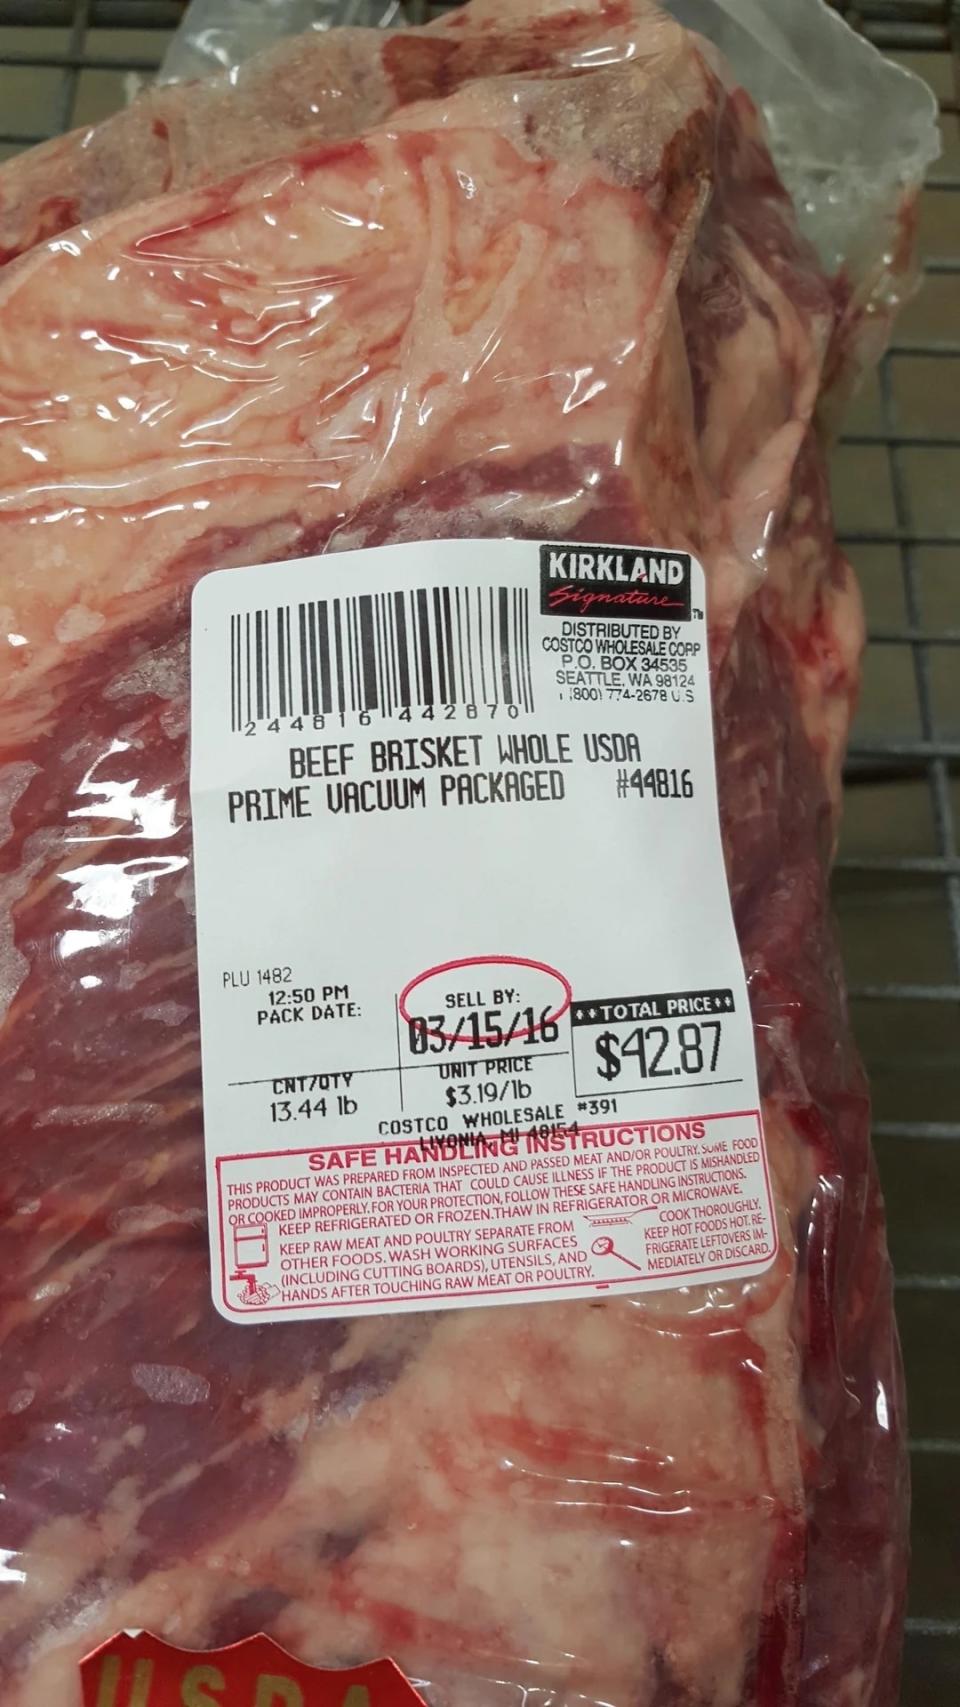 Packaged Kirkland beef brisket with price and sell-by date label, indicating it's USDA choice